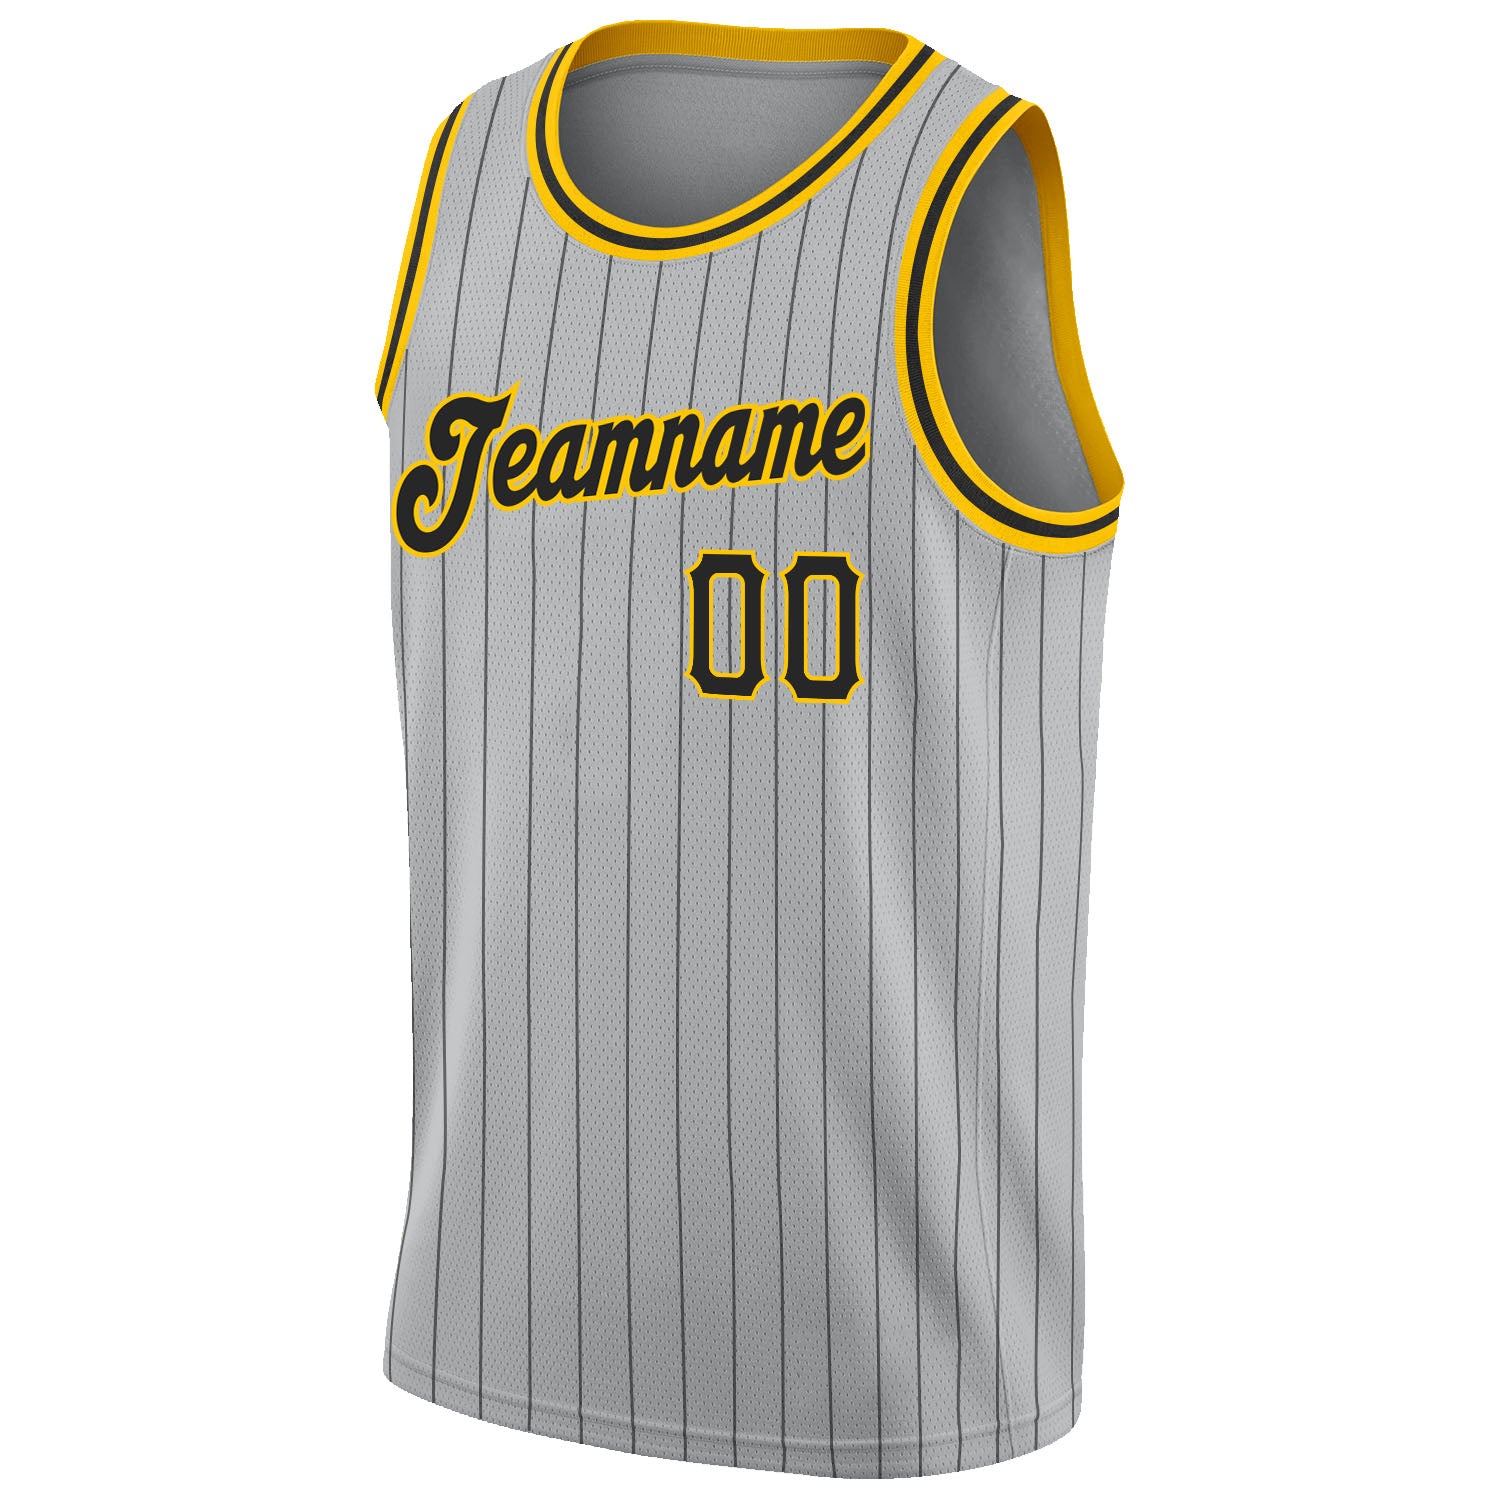 giannis antetokounmpo jersey black and gold